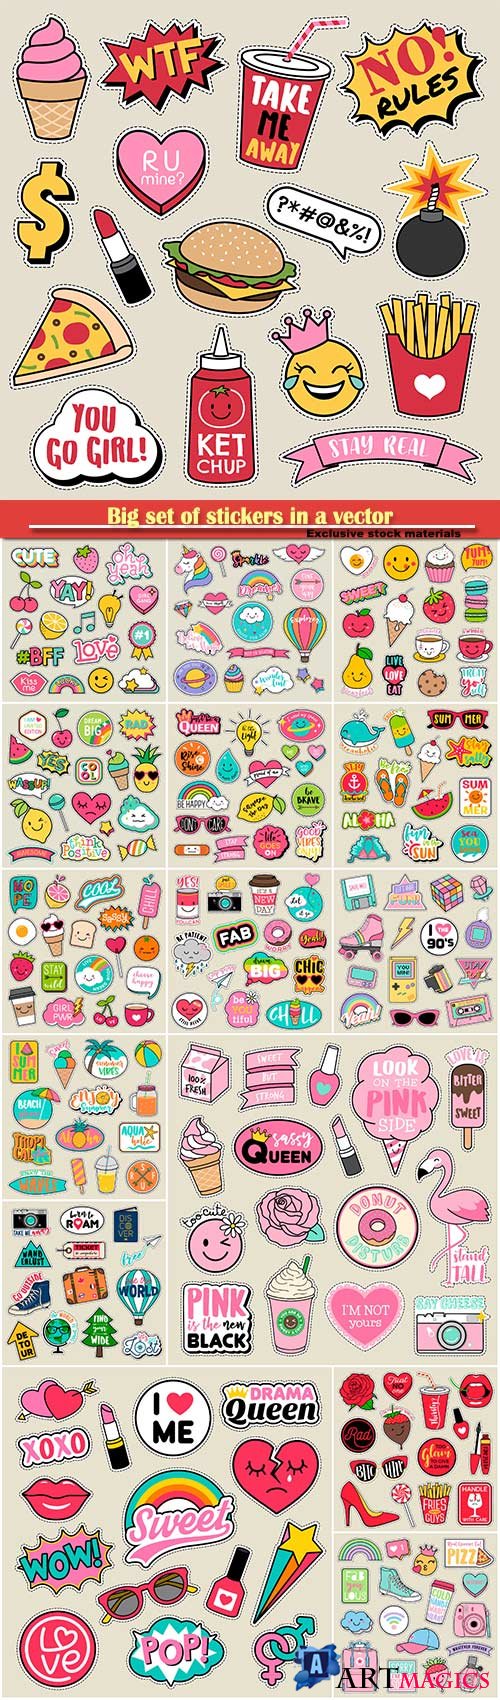 Big set of stickers in a vector, food, cosmetics, travel